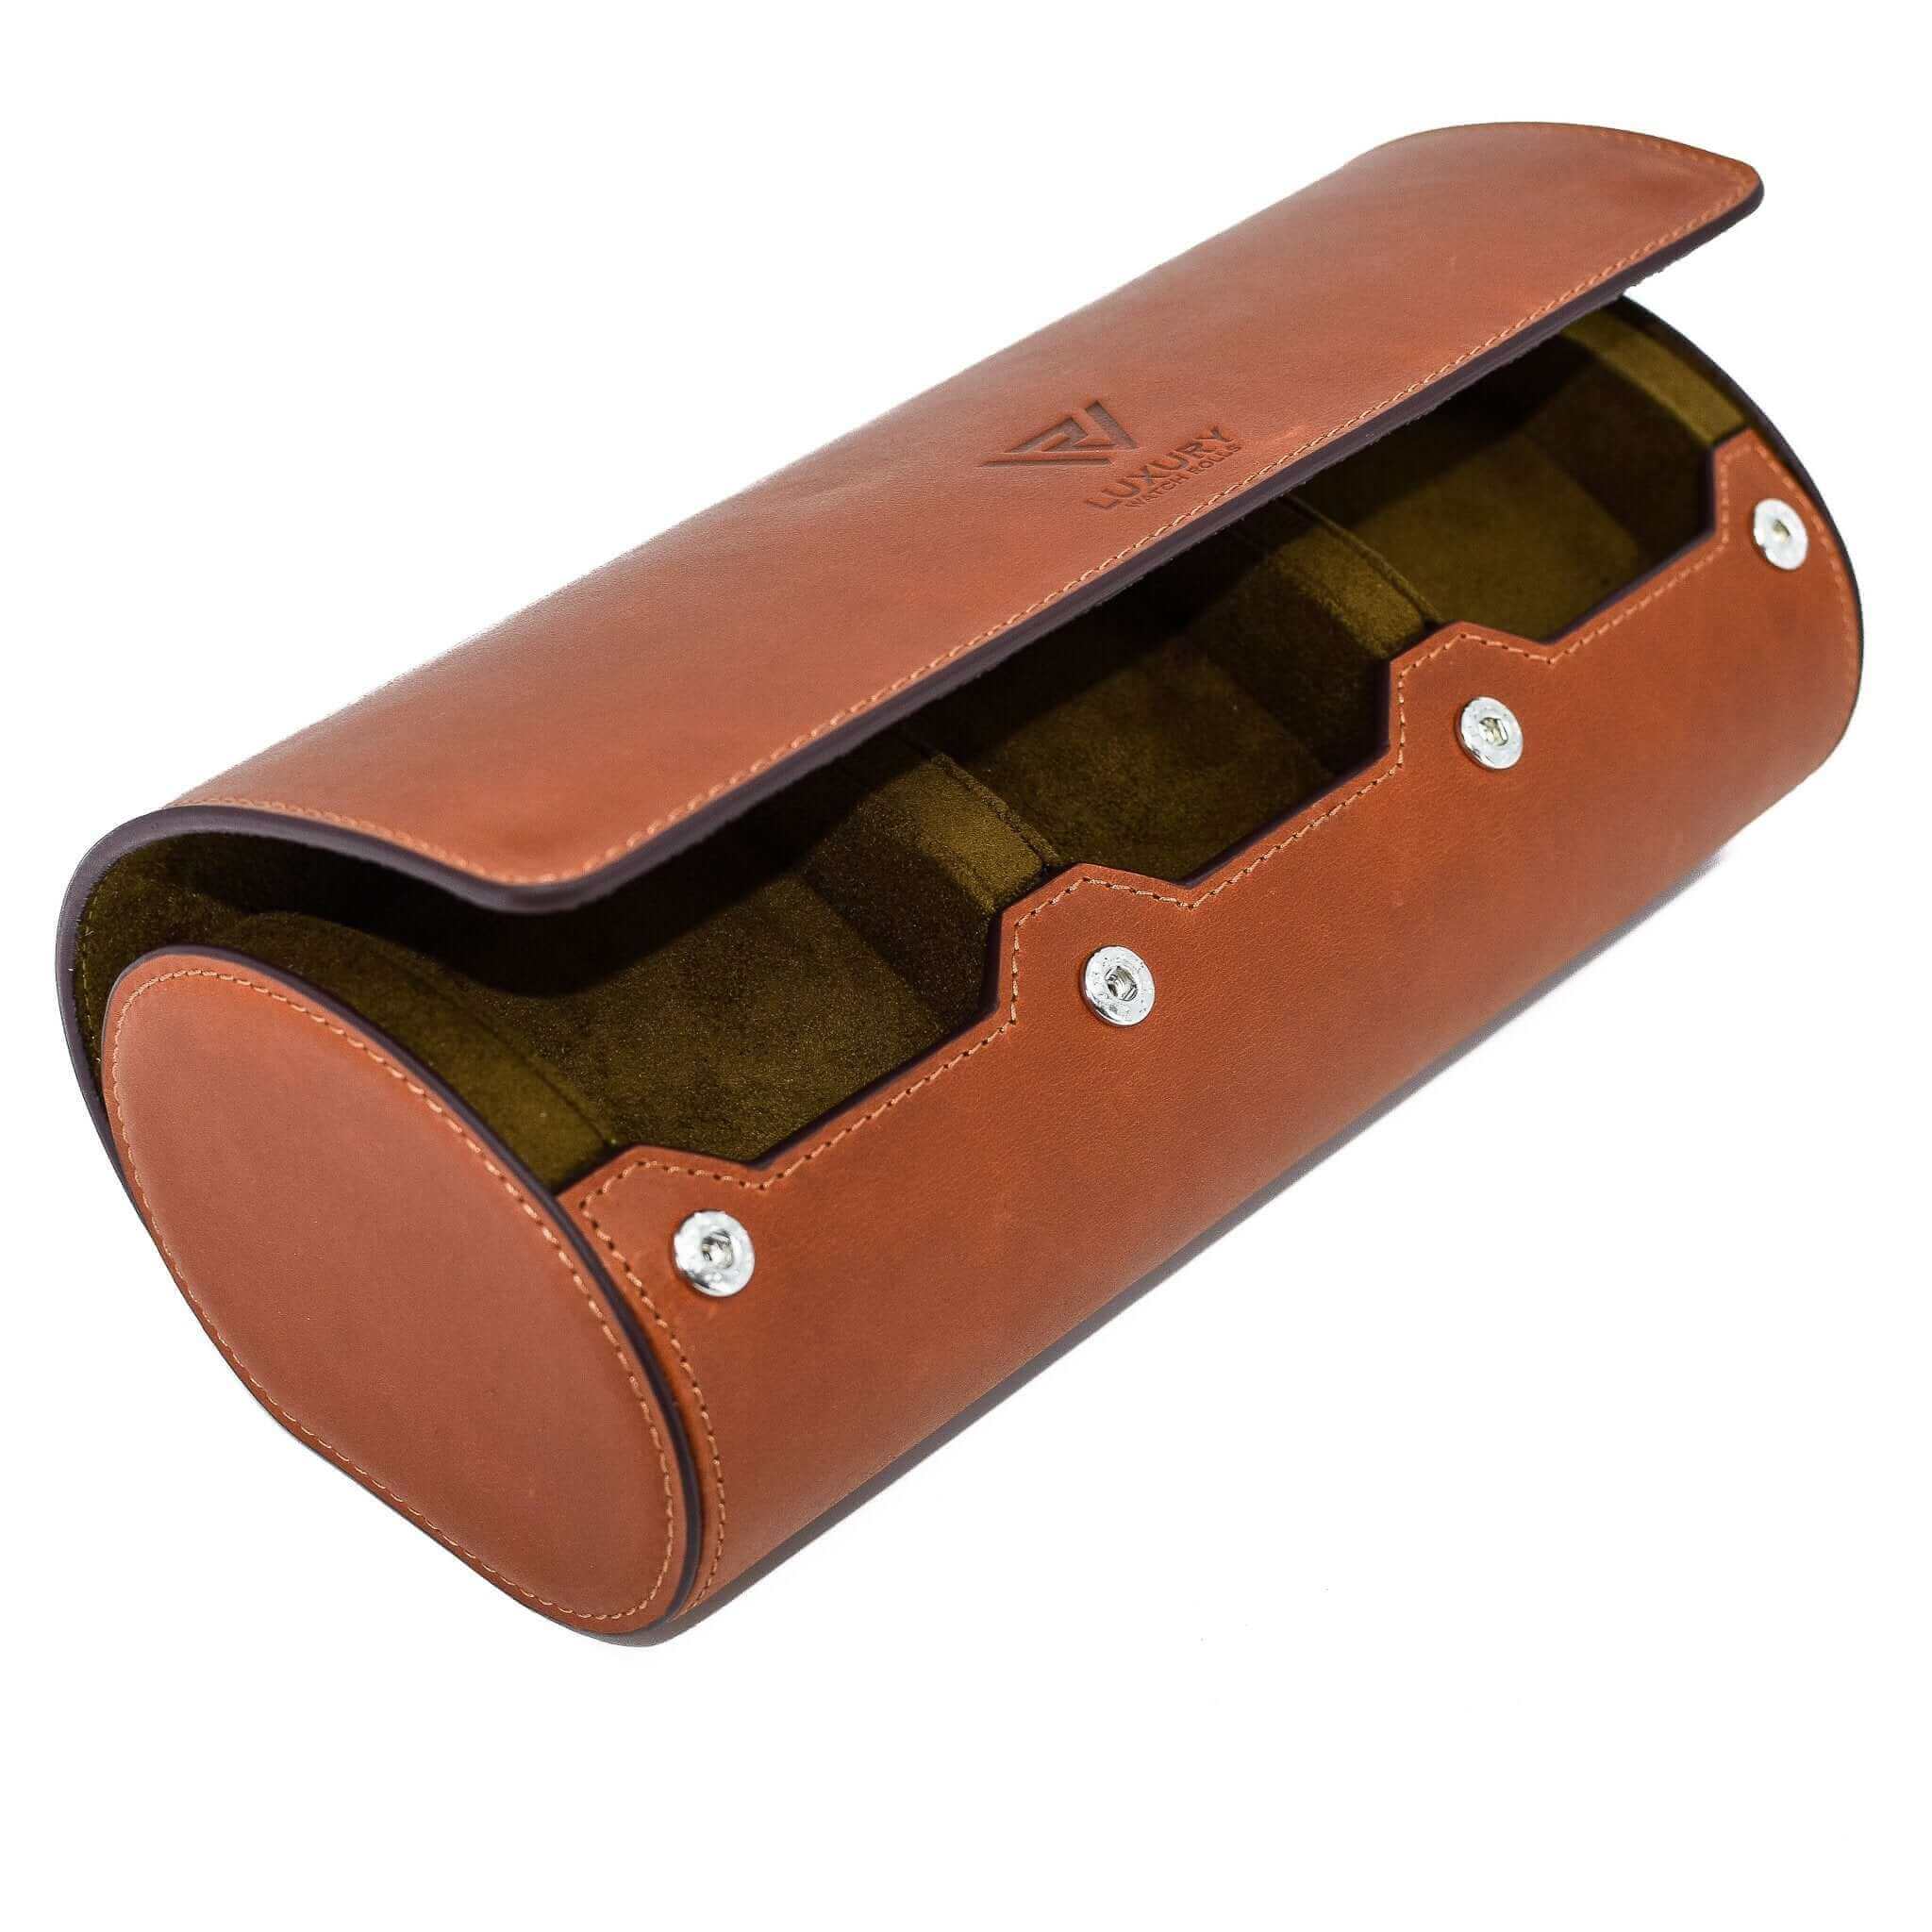 A side view showing the inside of Luxury Watch Roll's triple slot, vintage brown leather watch roll for three watch storage.